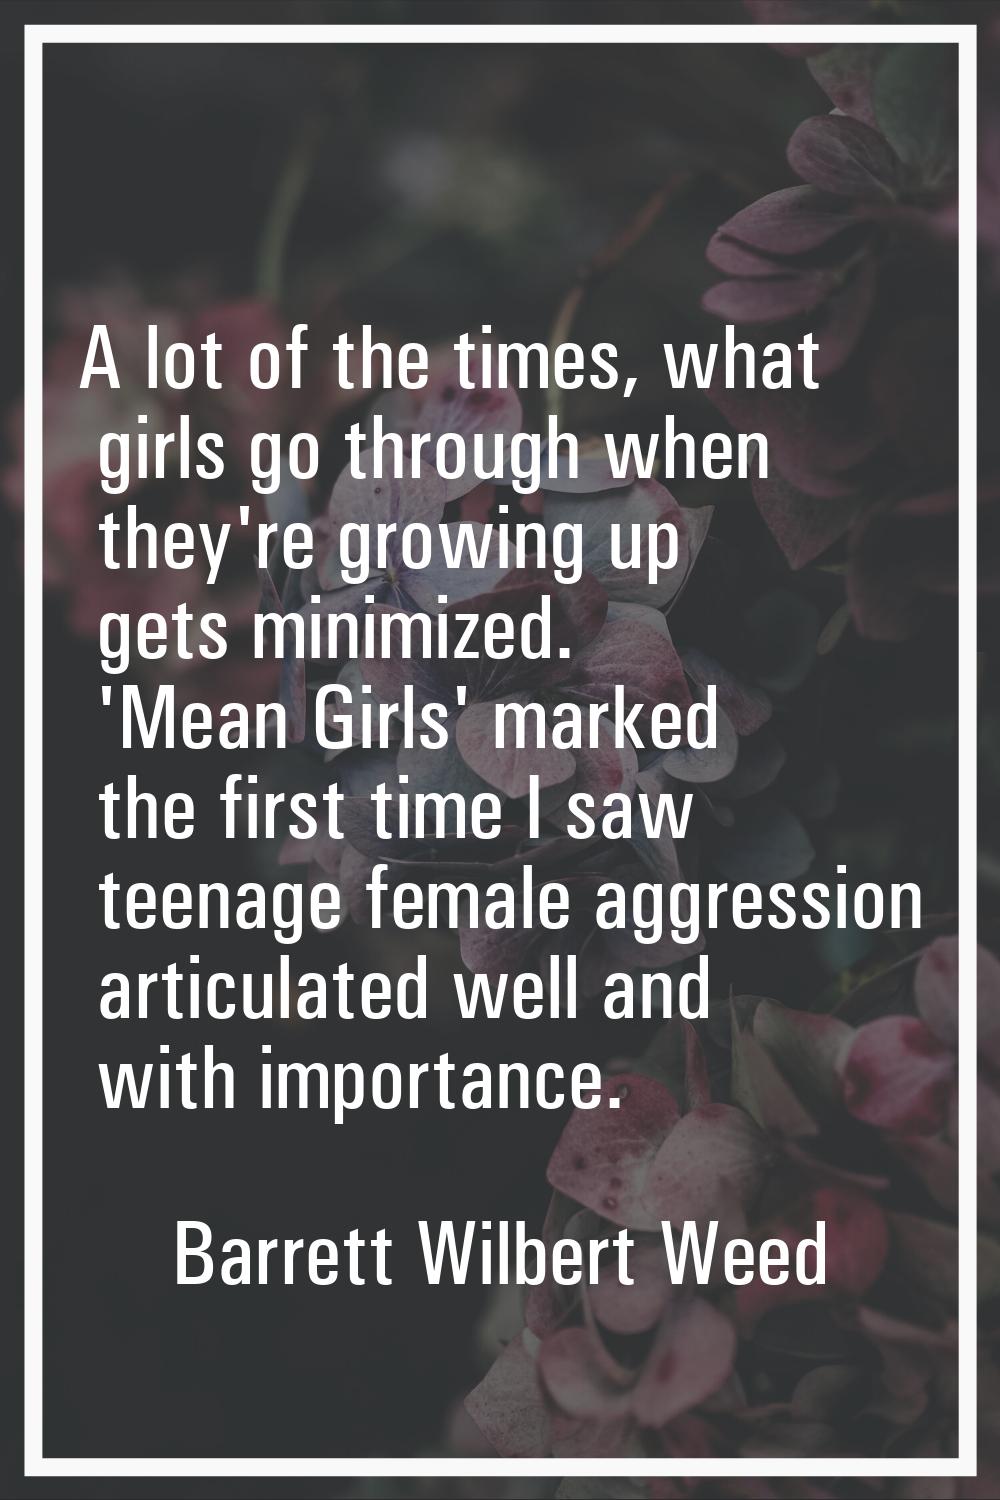 A lot of the times, what girls go through when they're growing up gets minimized. 'Mean Girls' mark